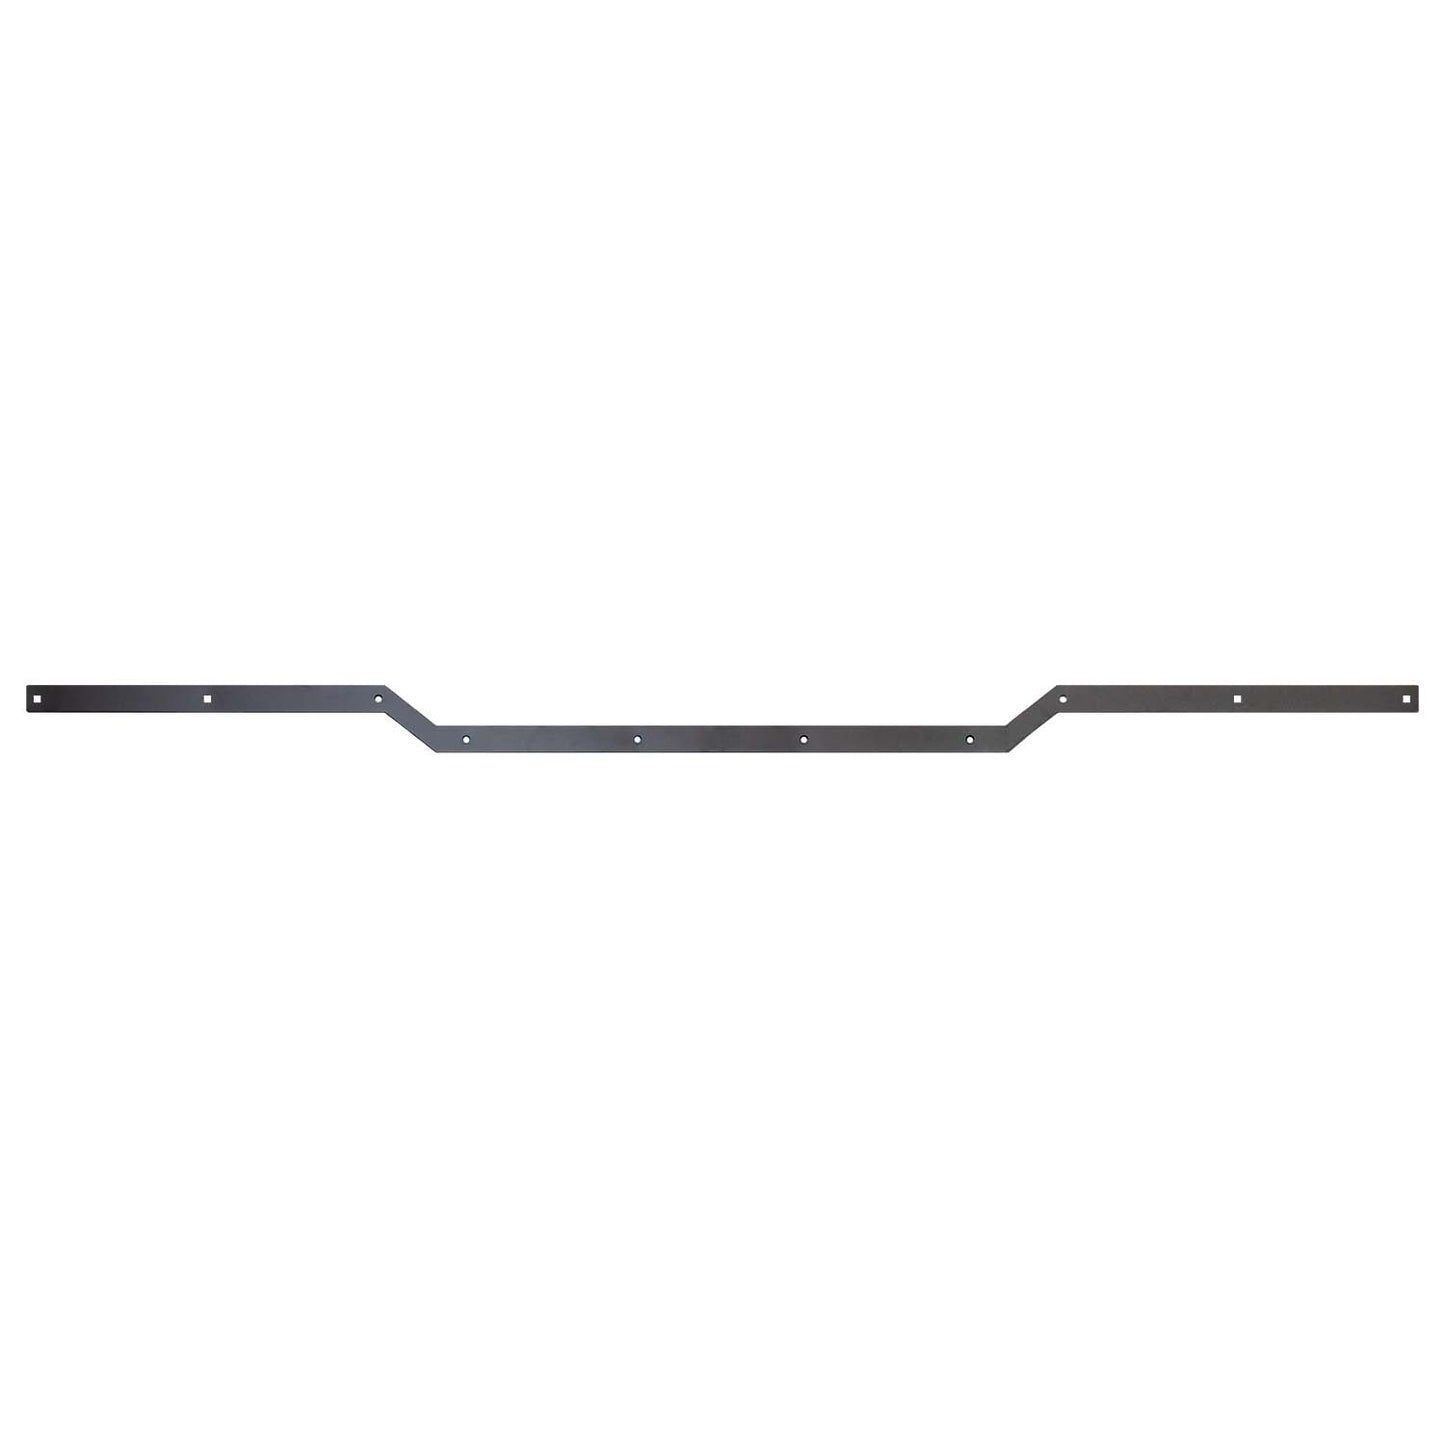 Replacement-12-inch-Notched-Top-Bar-Future-Sales-OEM-Rock-Guards-Mudflaps-TBB-N-02